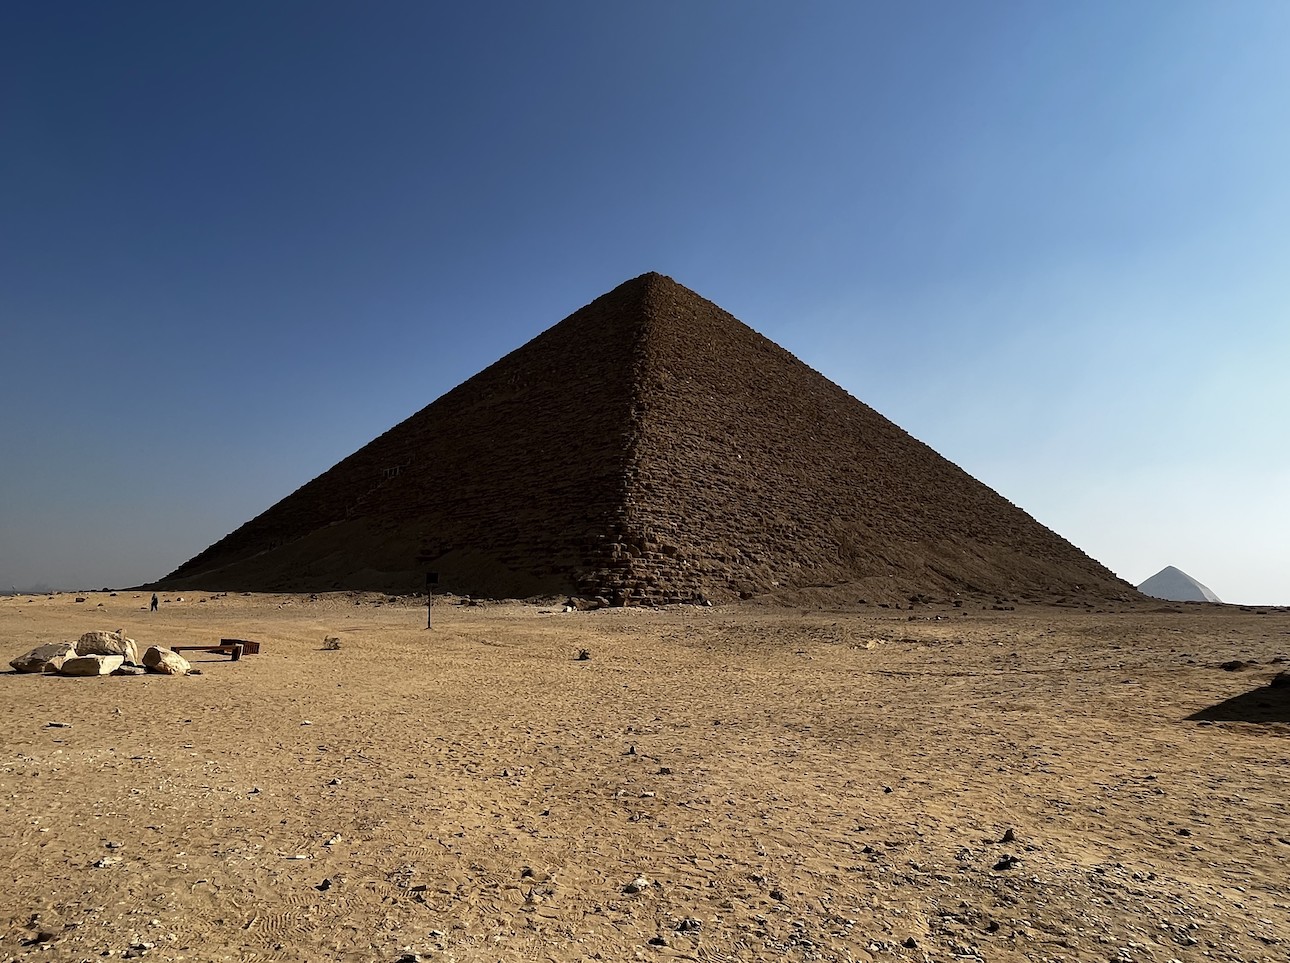 A large pyramid made of stone in the foreground with a smaller one in the background to the right. A few stones are on top of the sand to the left and a small person is in front of the pyramid.